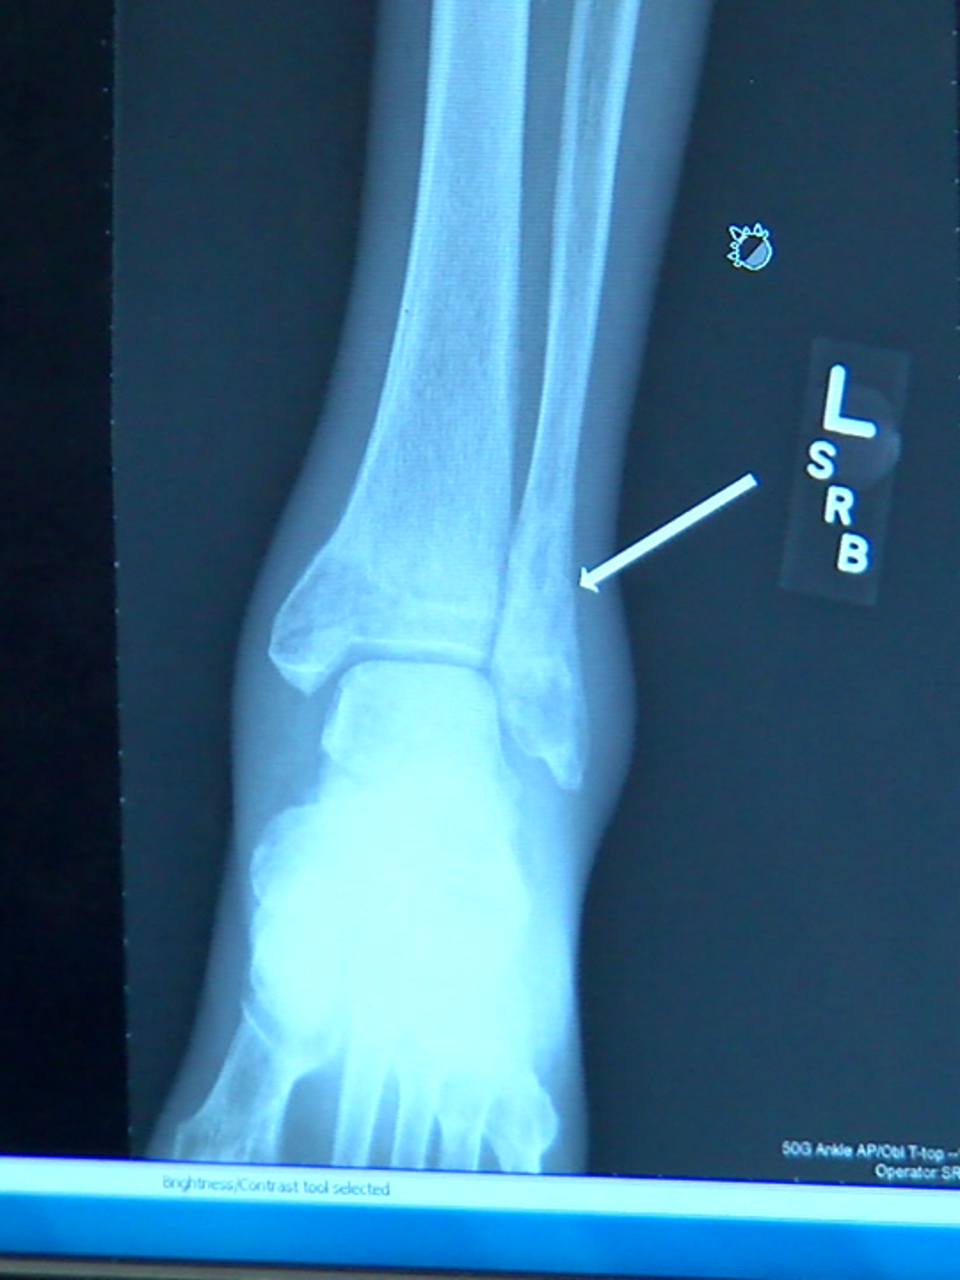 stress fracture